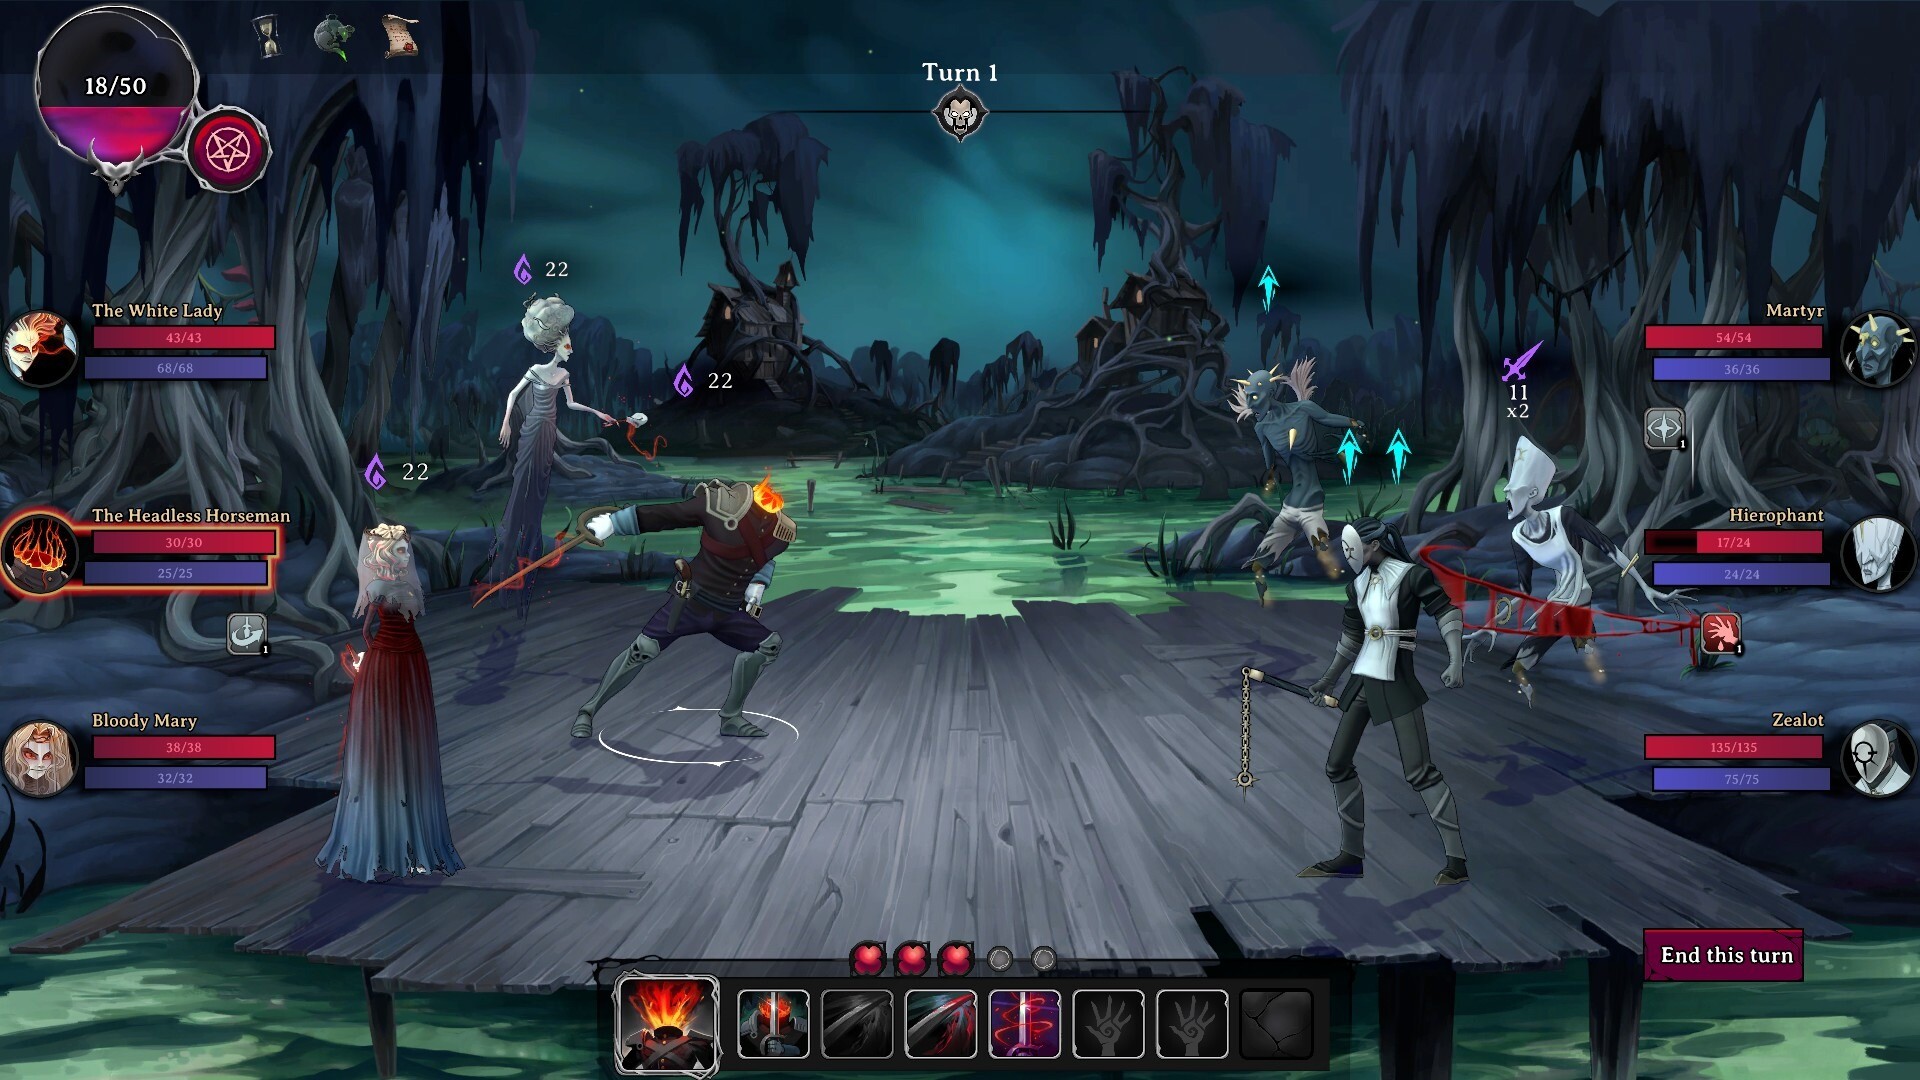 Rogue Lords game screenshot, combat in the swamp